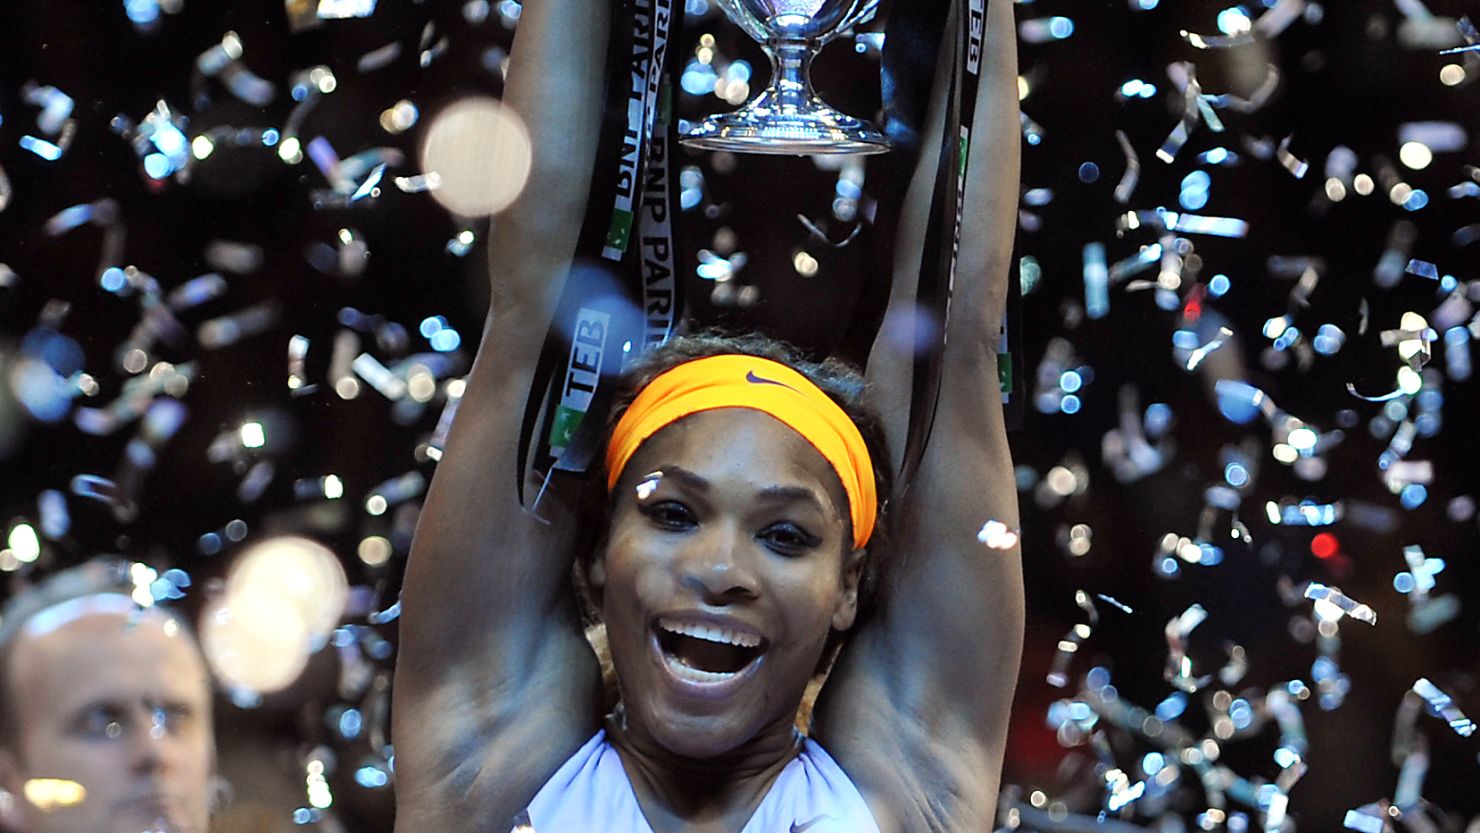 A relieved Serena Williams lifts the WTA Championship title aloft after beating Li Na in a three set final.